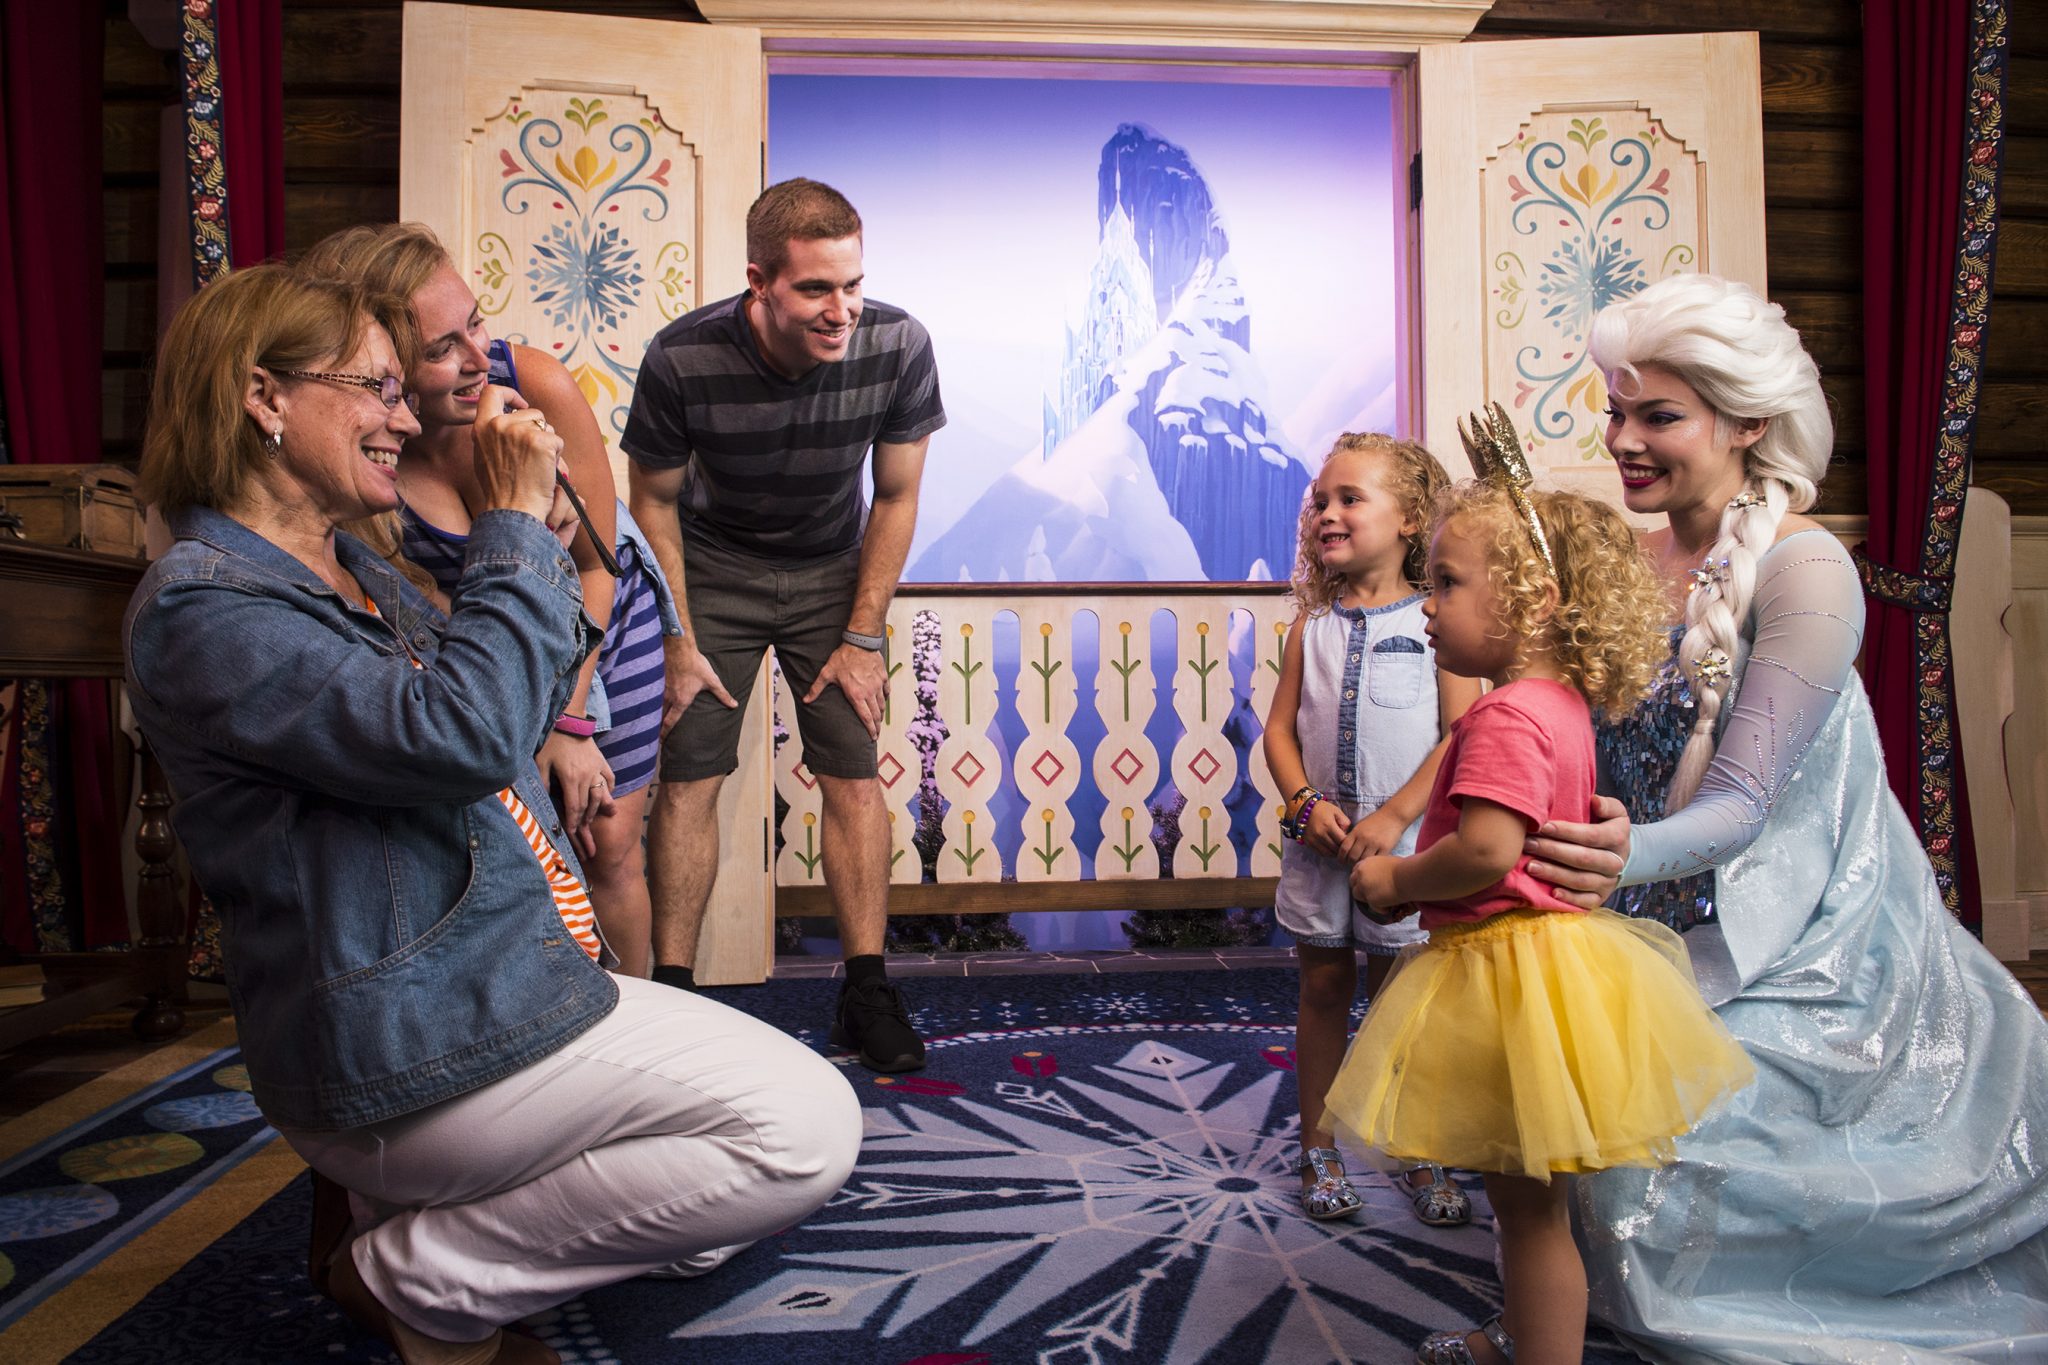 Guests can meet Princess Anna & Queen Elsa from "Frozen" inside Royal Sommerhus, their cozy cabin in the Norway Pavilion at Epcot. Here, guests can meet the royal sisters, pose for a photo, and share a warm embrace. Epcot is one of four theme parks at Walt Disney World Resort located in Lake Buena Vista, Fla. (Ryan Wendler, photographer)